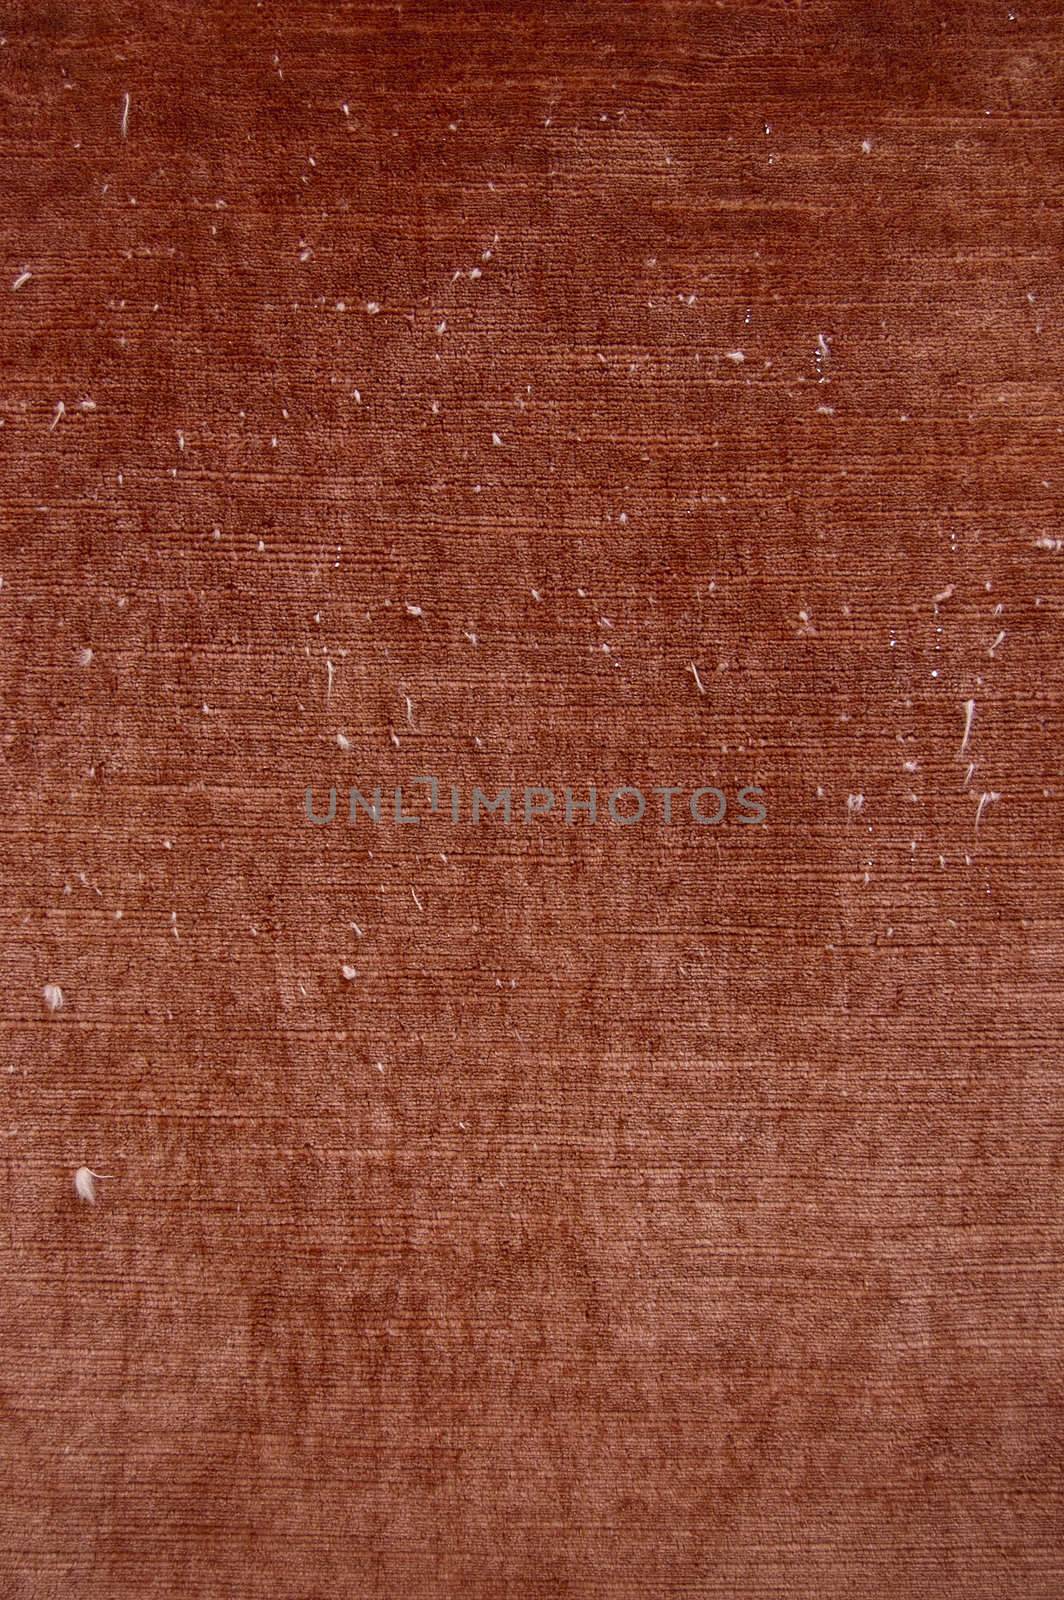 Vintage close up of a brown fabric background